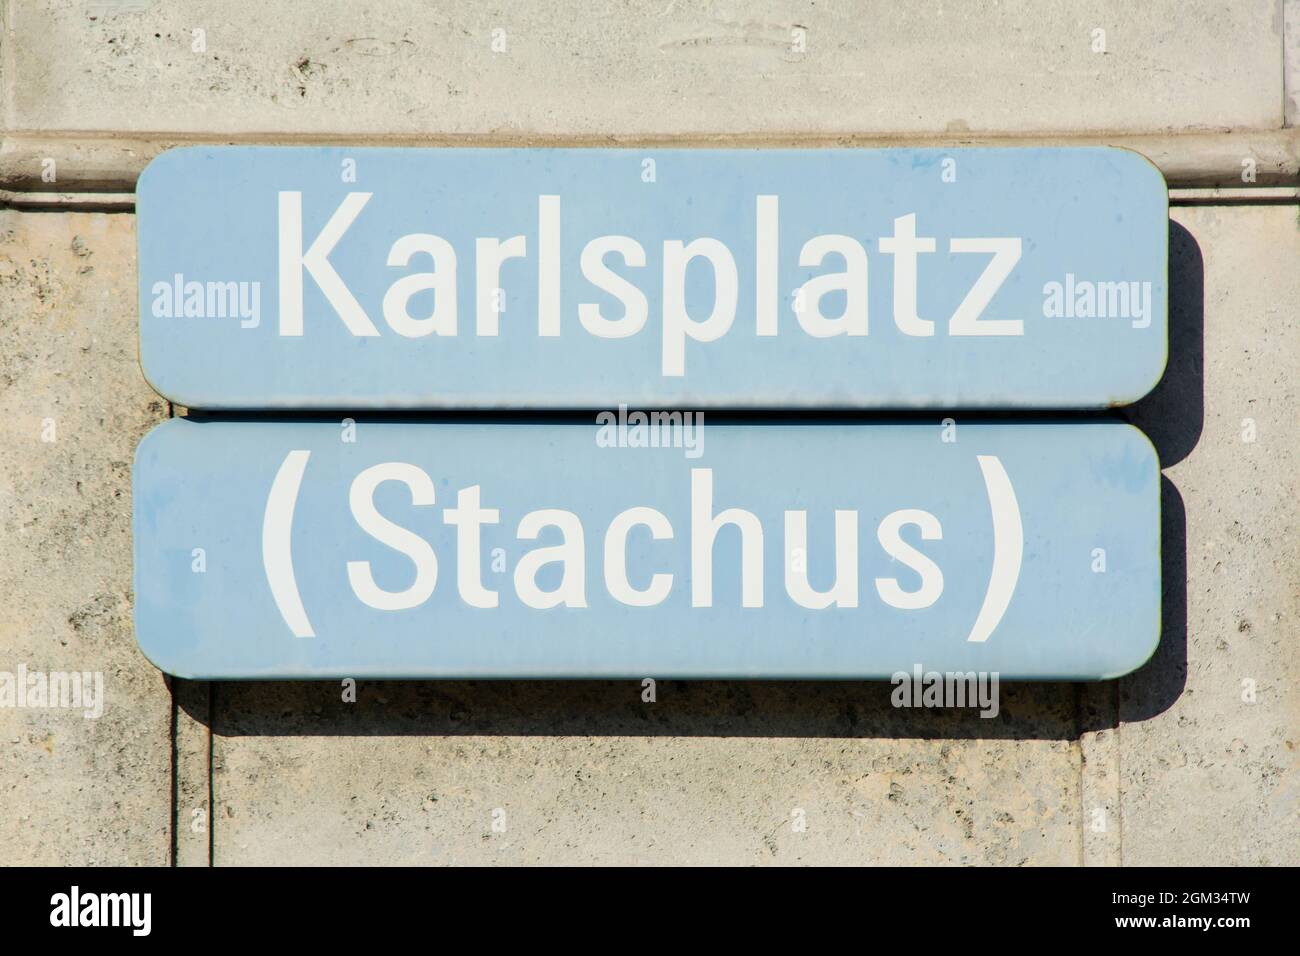 Street sign from the Karlsplatz square in the center of Munich - Germany. Stock Photo